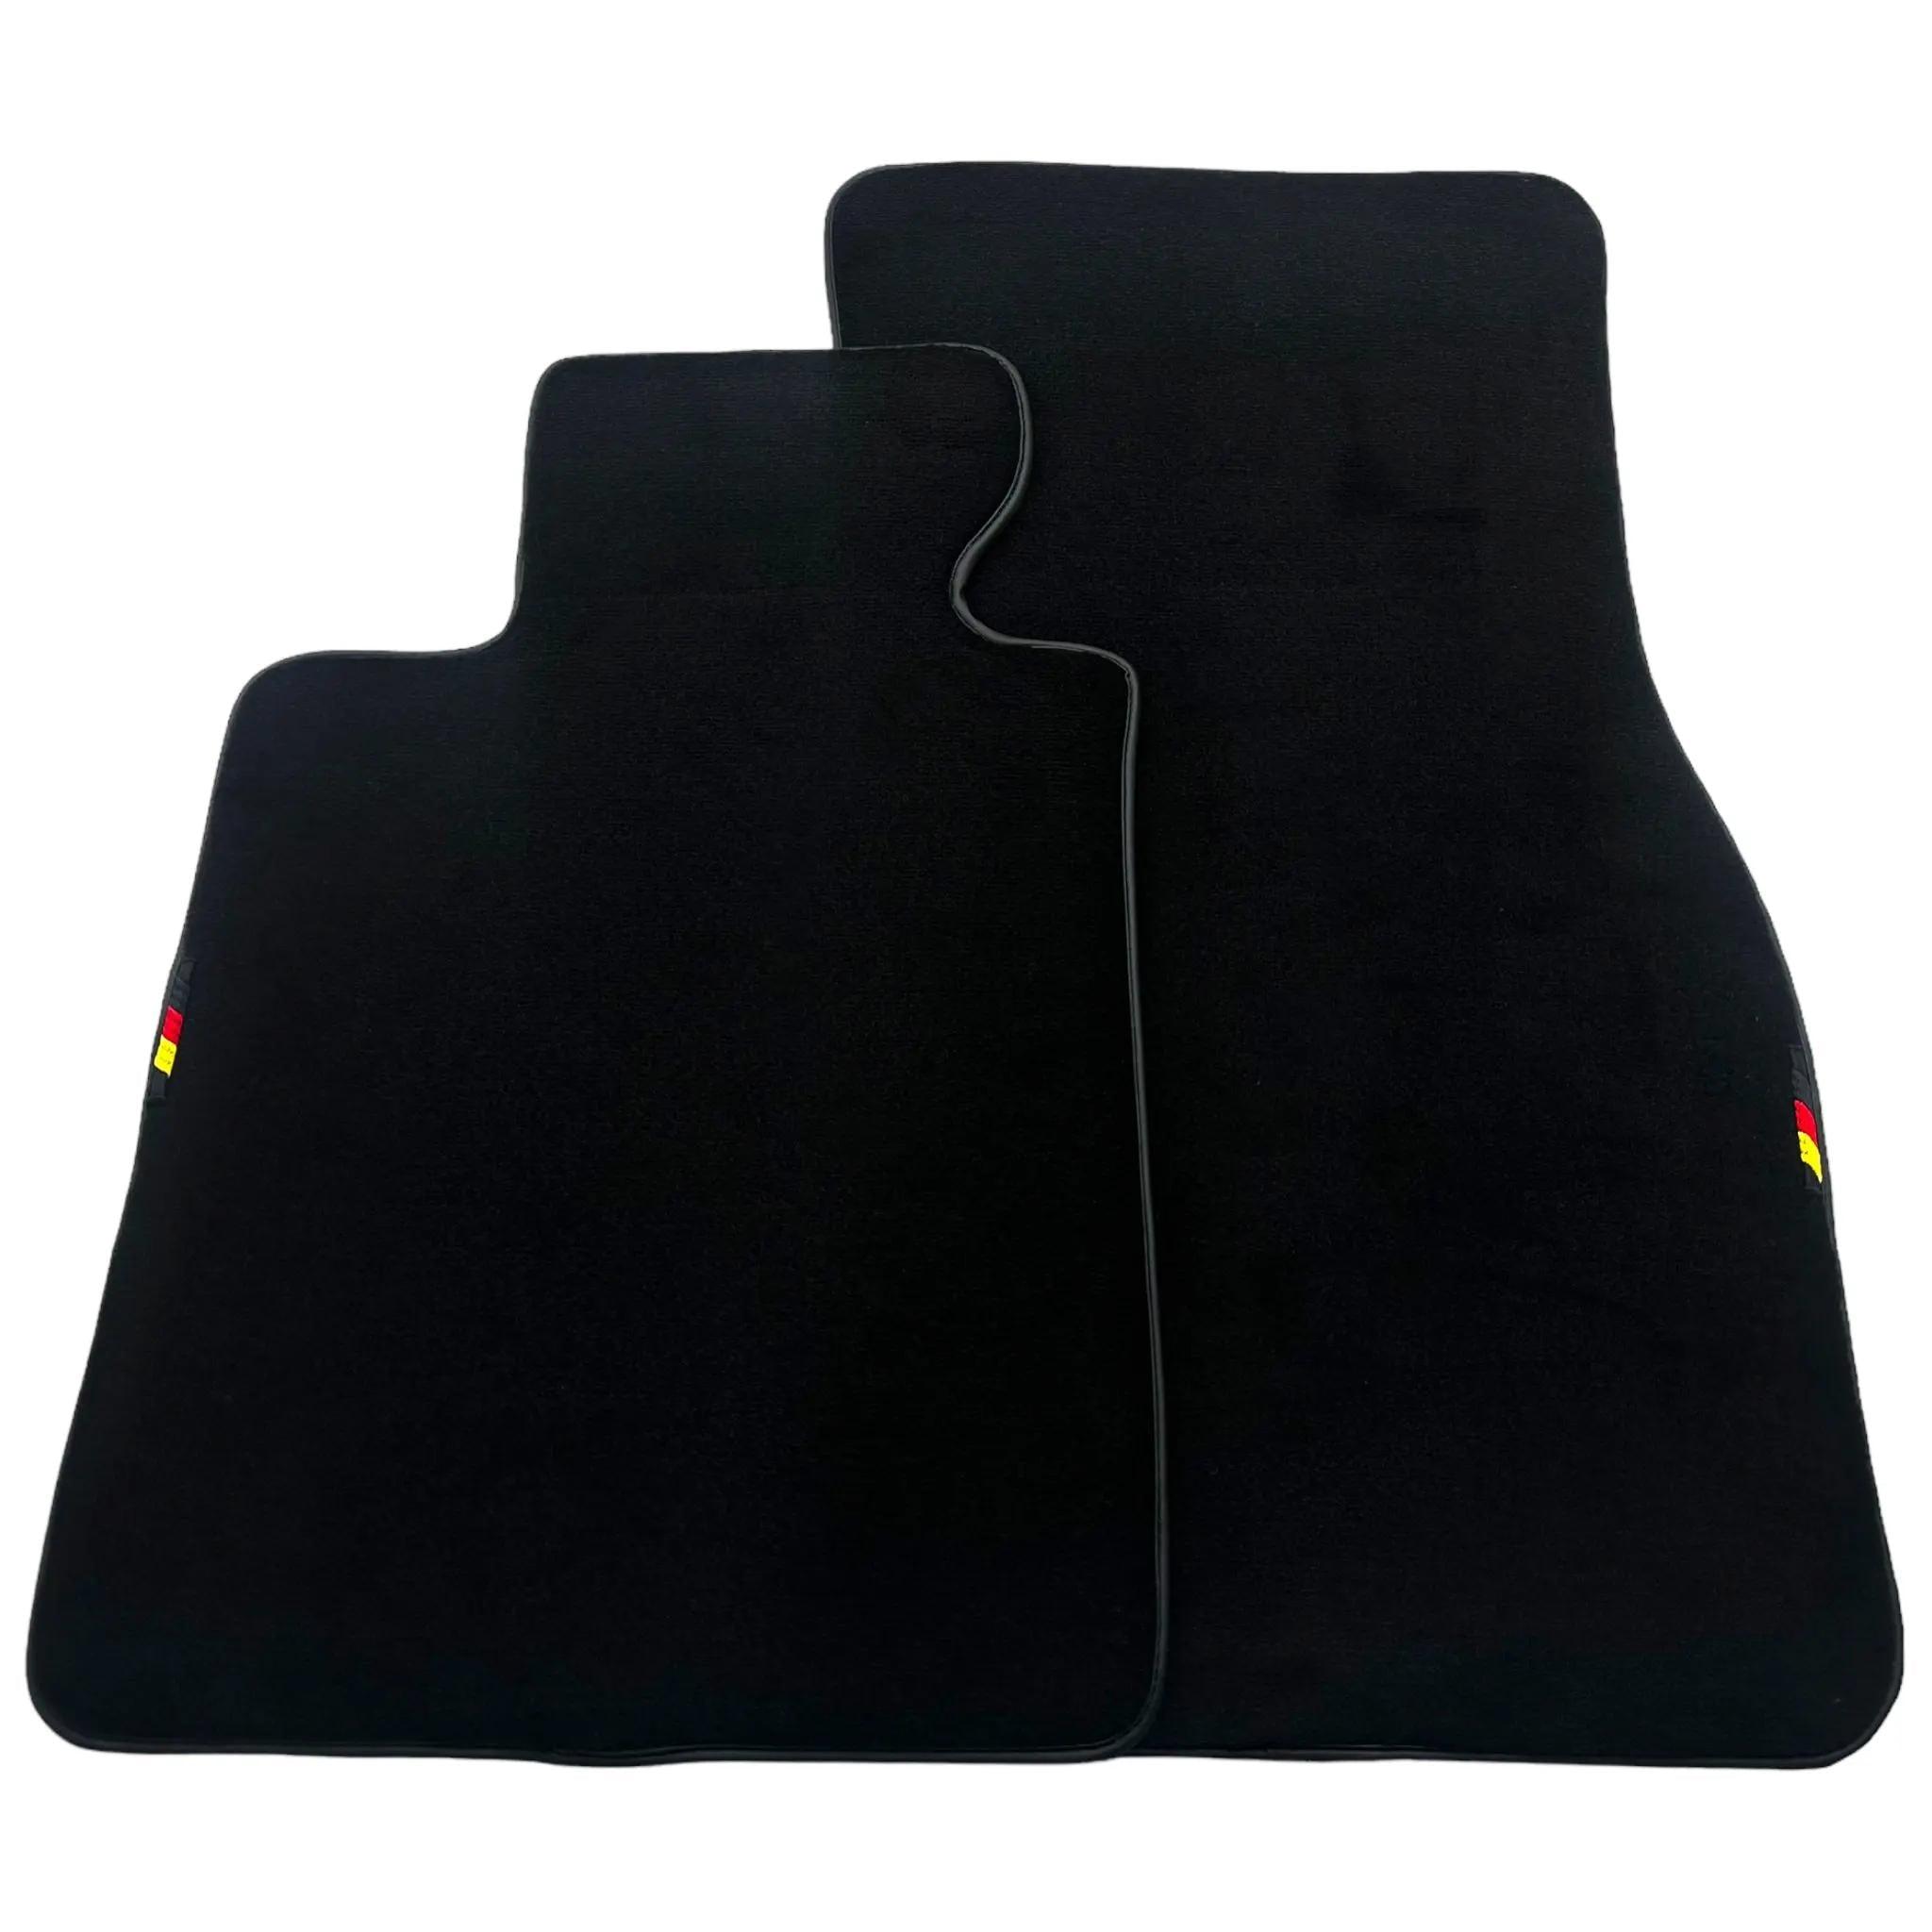 Black Floor Mats For BMW 7 Series E38 Long Germany Edition